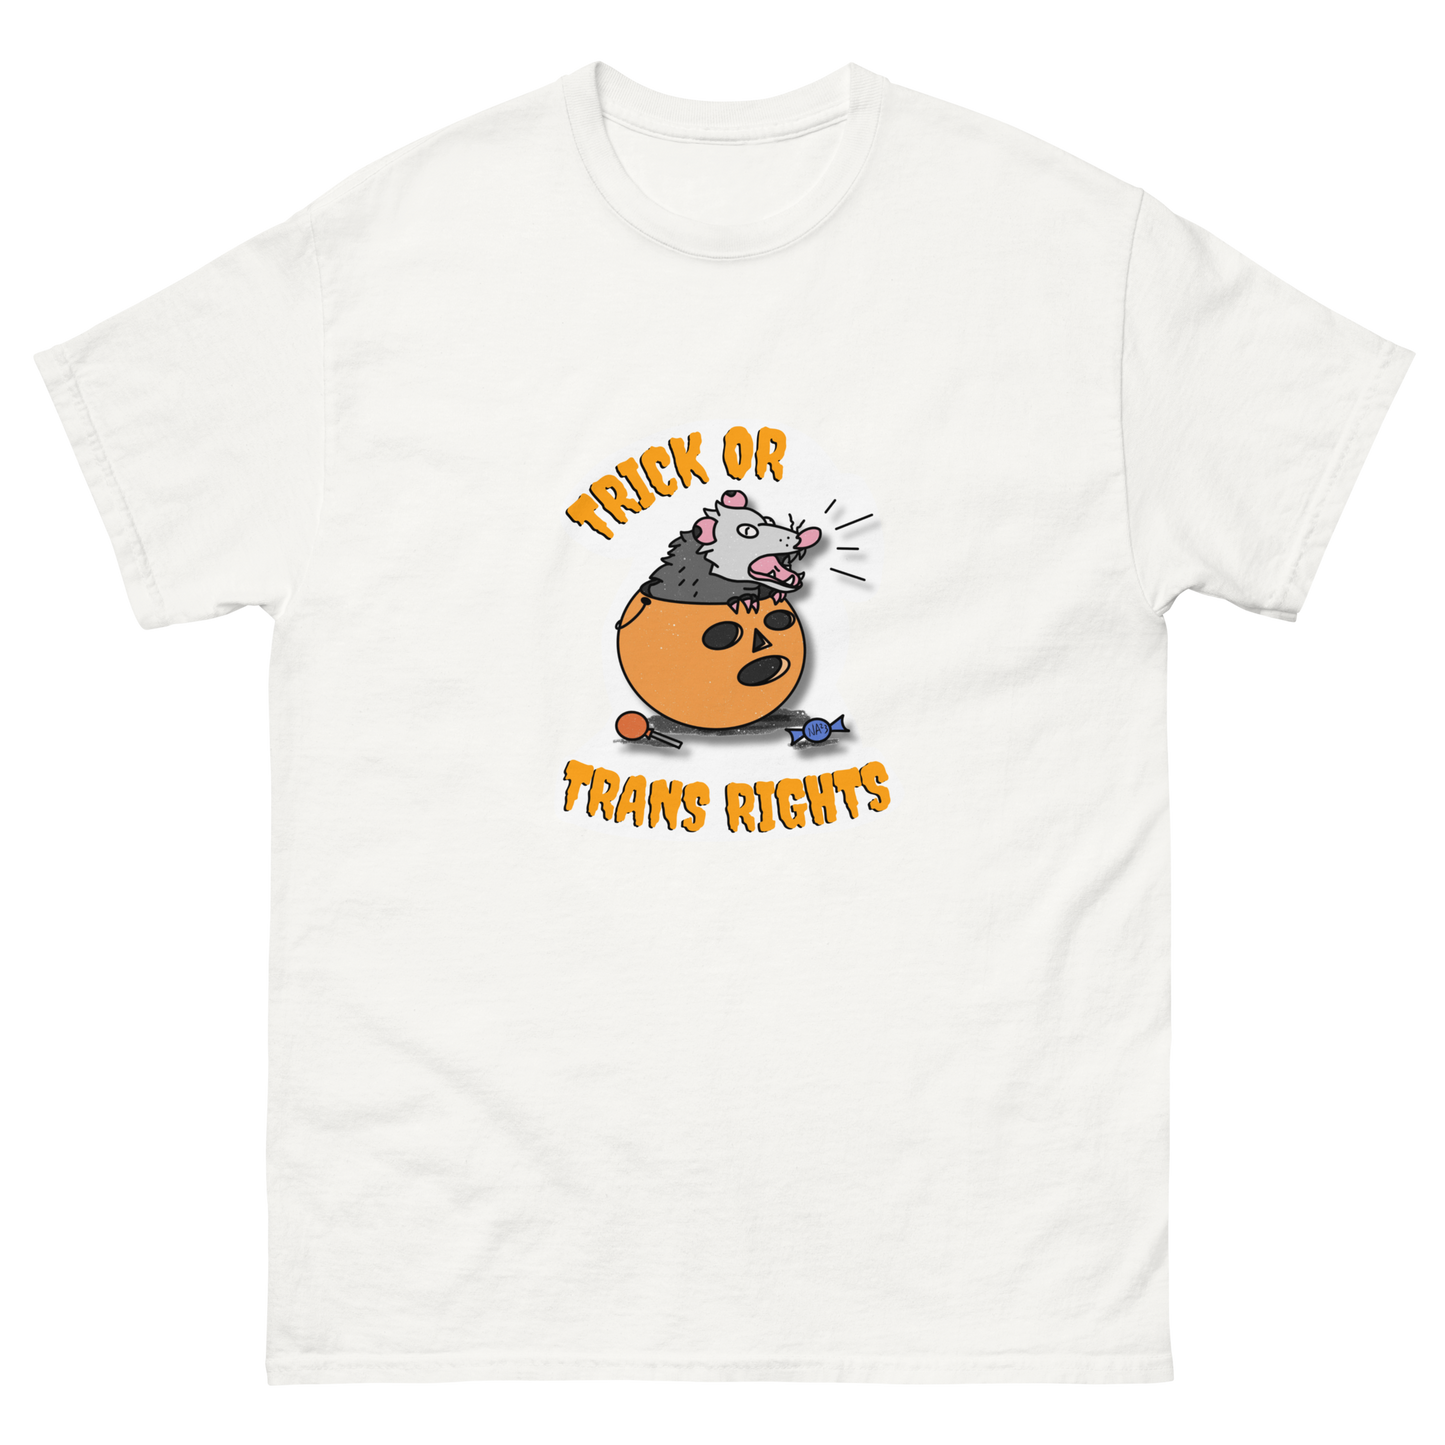 This design features a possum in an orange plastic candy bucket with the text "Trick or Transphobia" on a white t-shirt. This image is the shirt design laid flat.